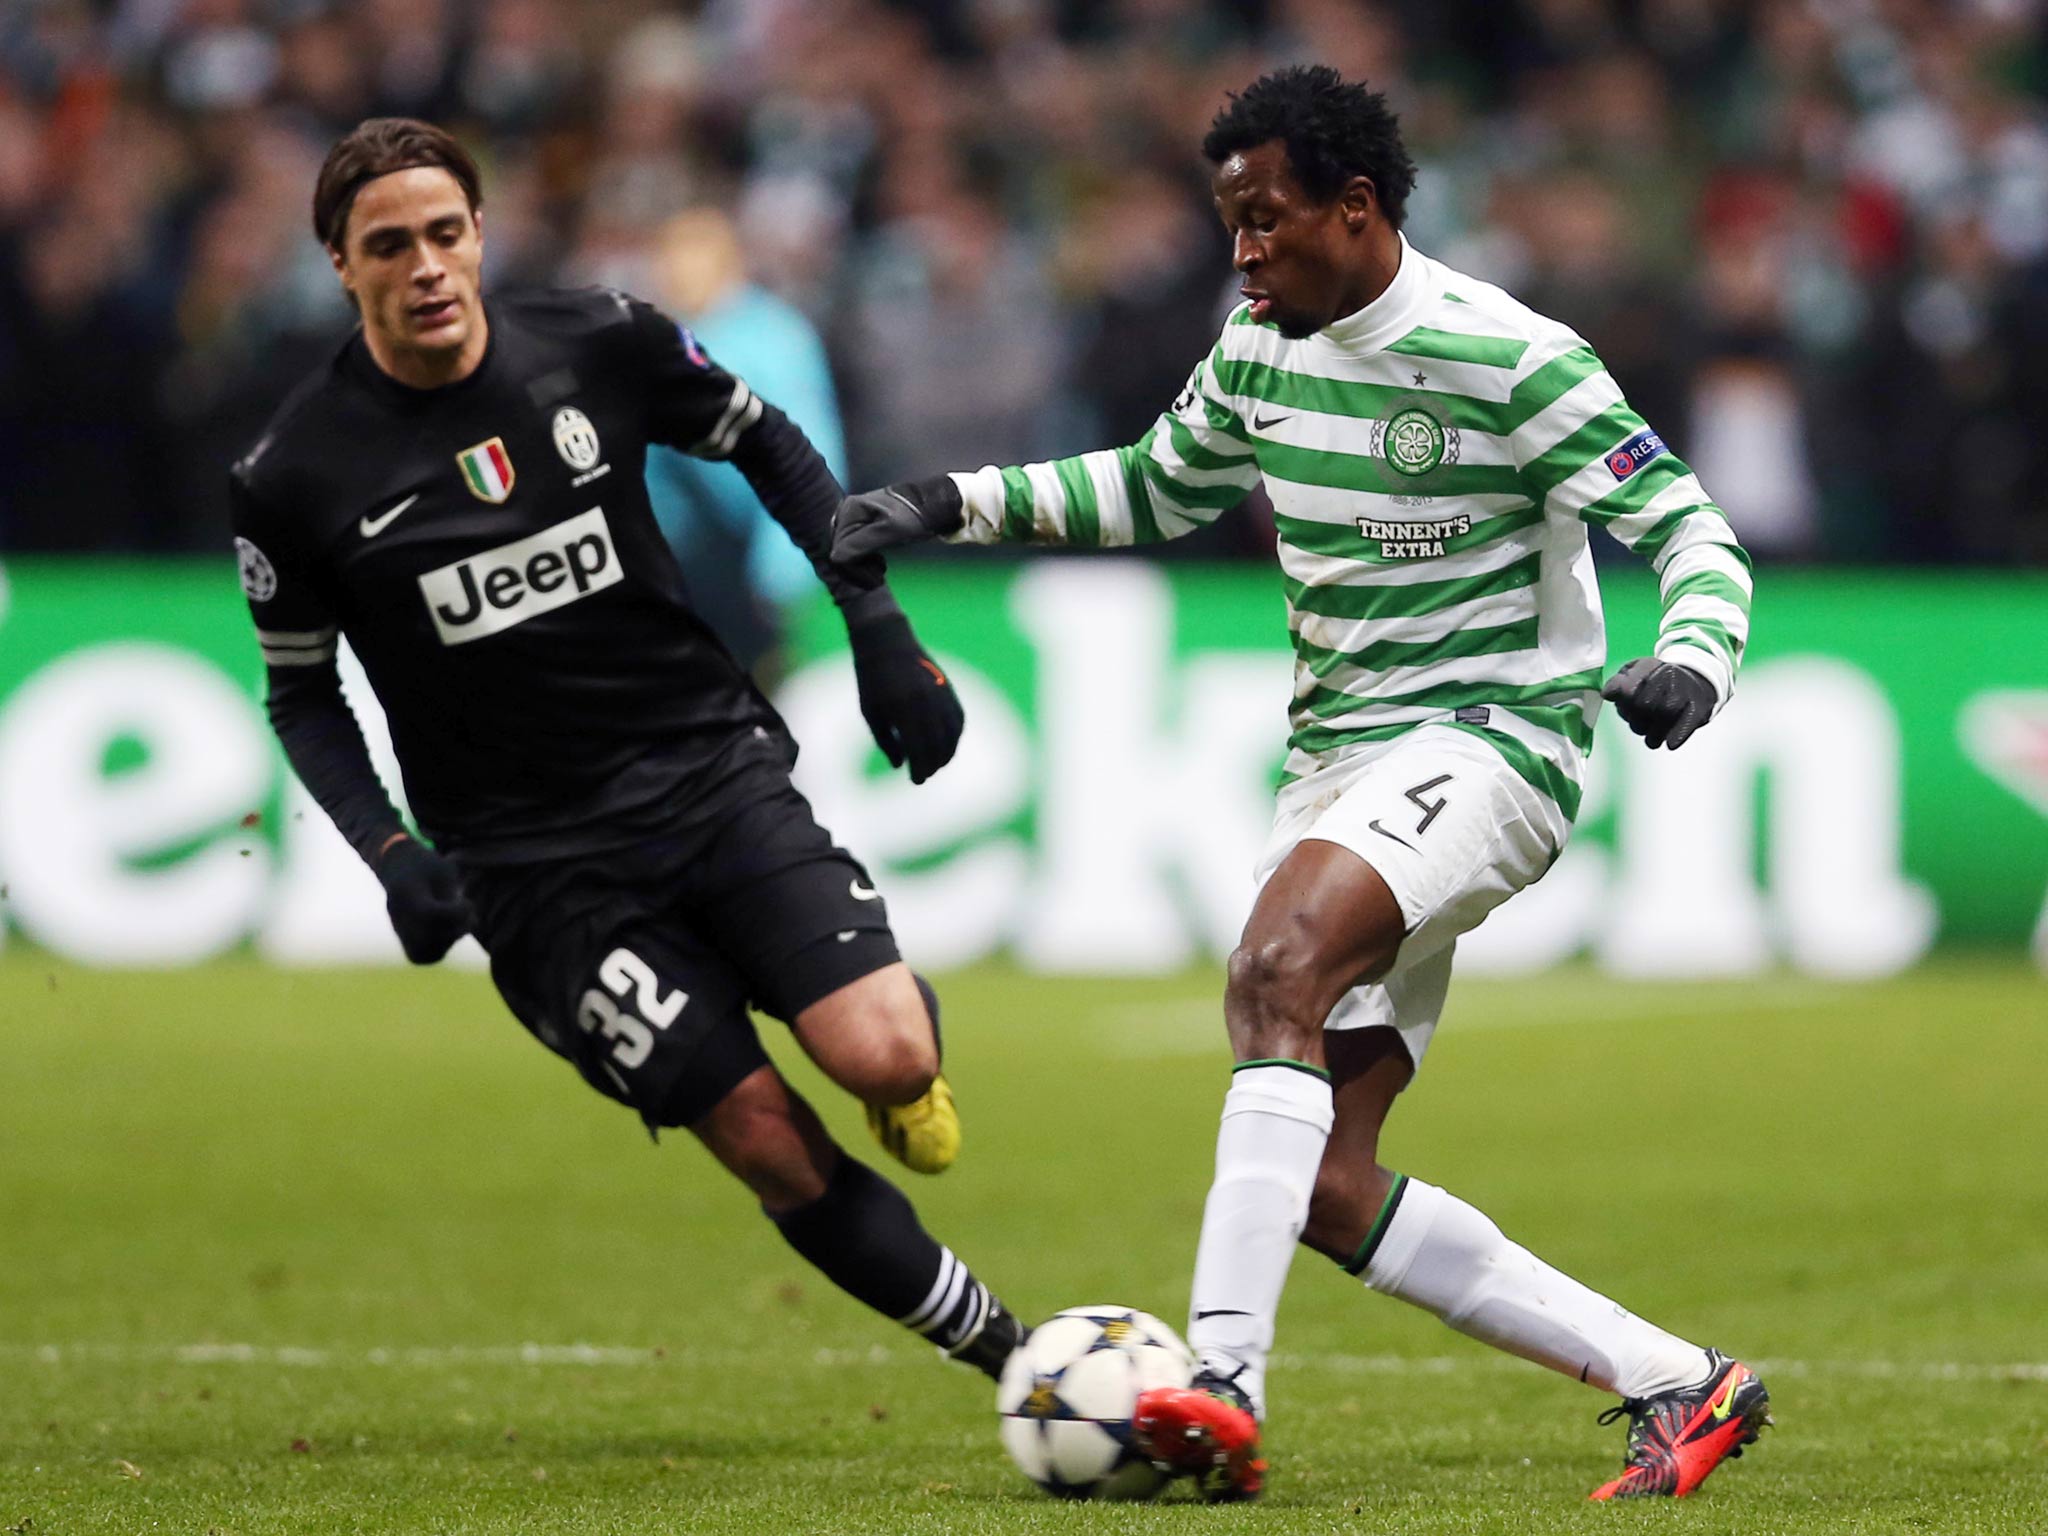 Efe Ambrose pictured in action against Juventus